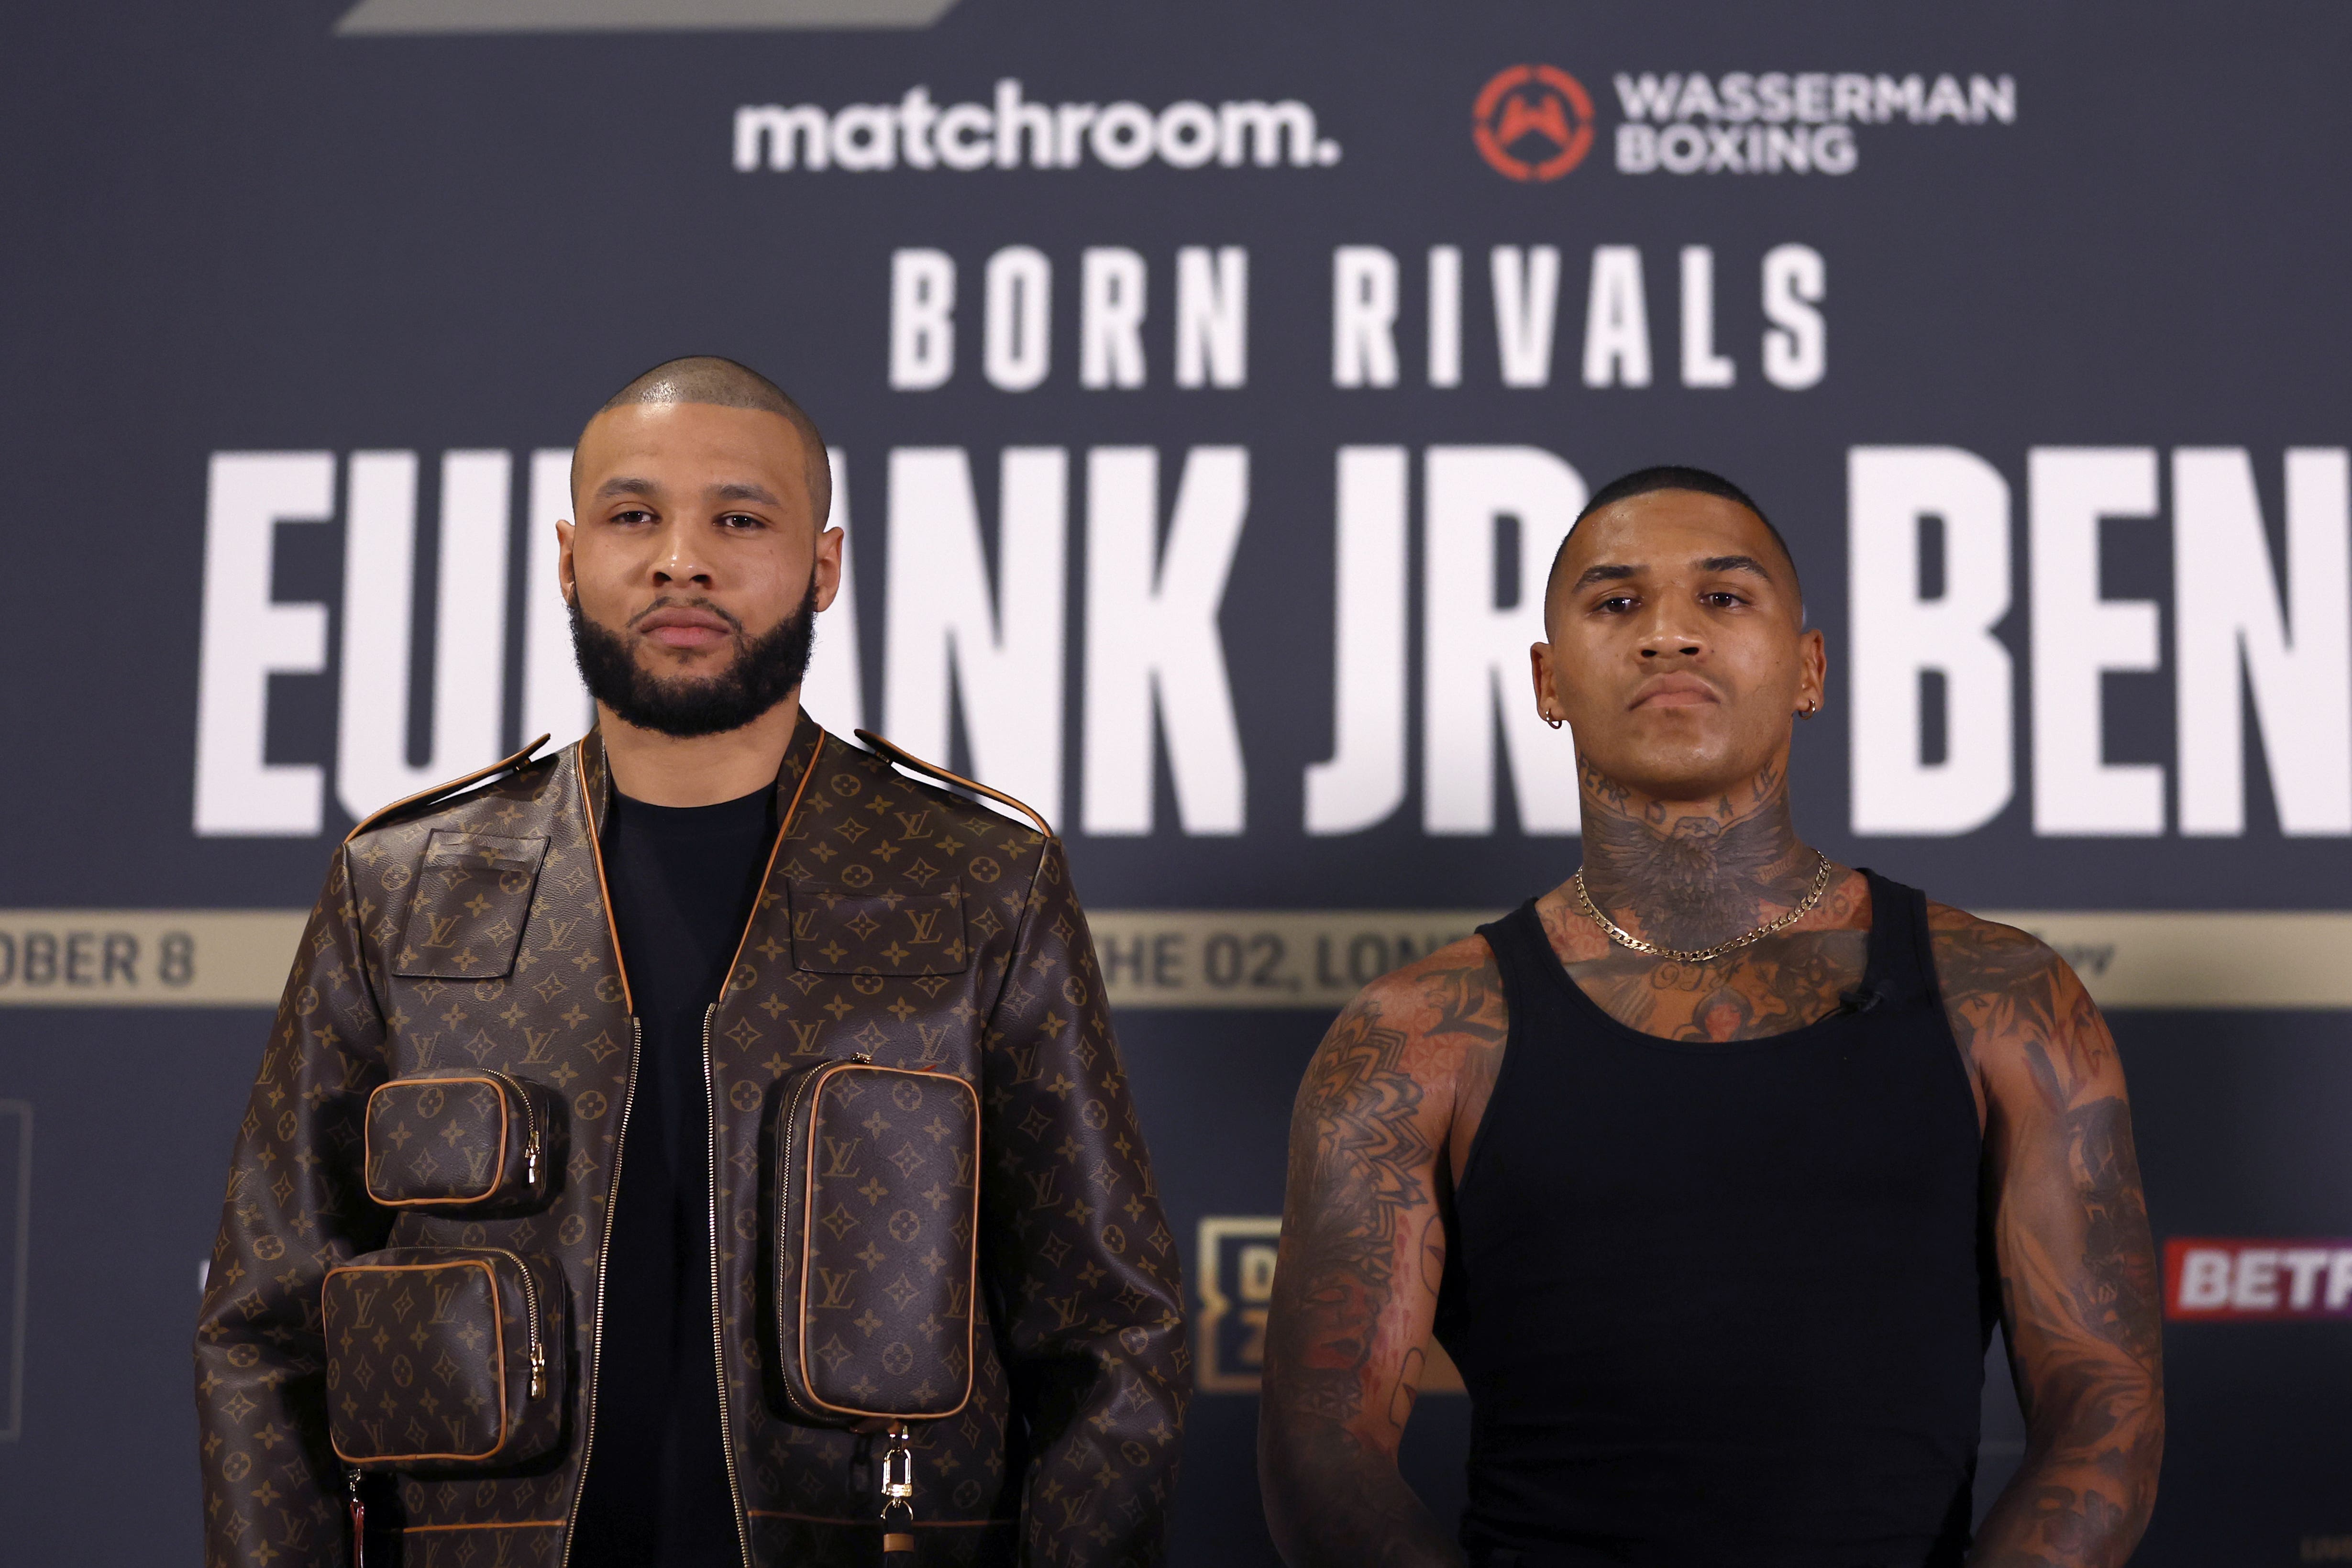 Chris Eubank Jr (left) and Conor Benn ahead of their cancelled catchweight fight (Steven Paston/PA)